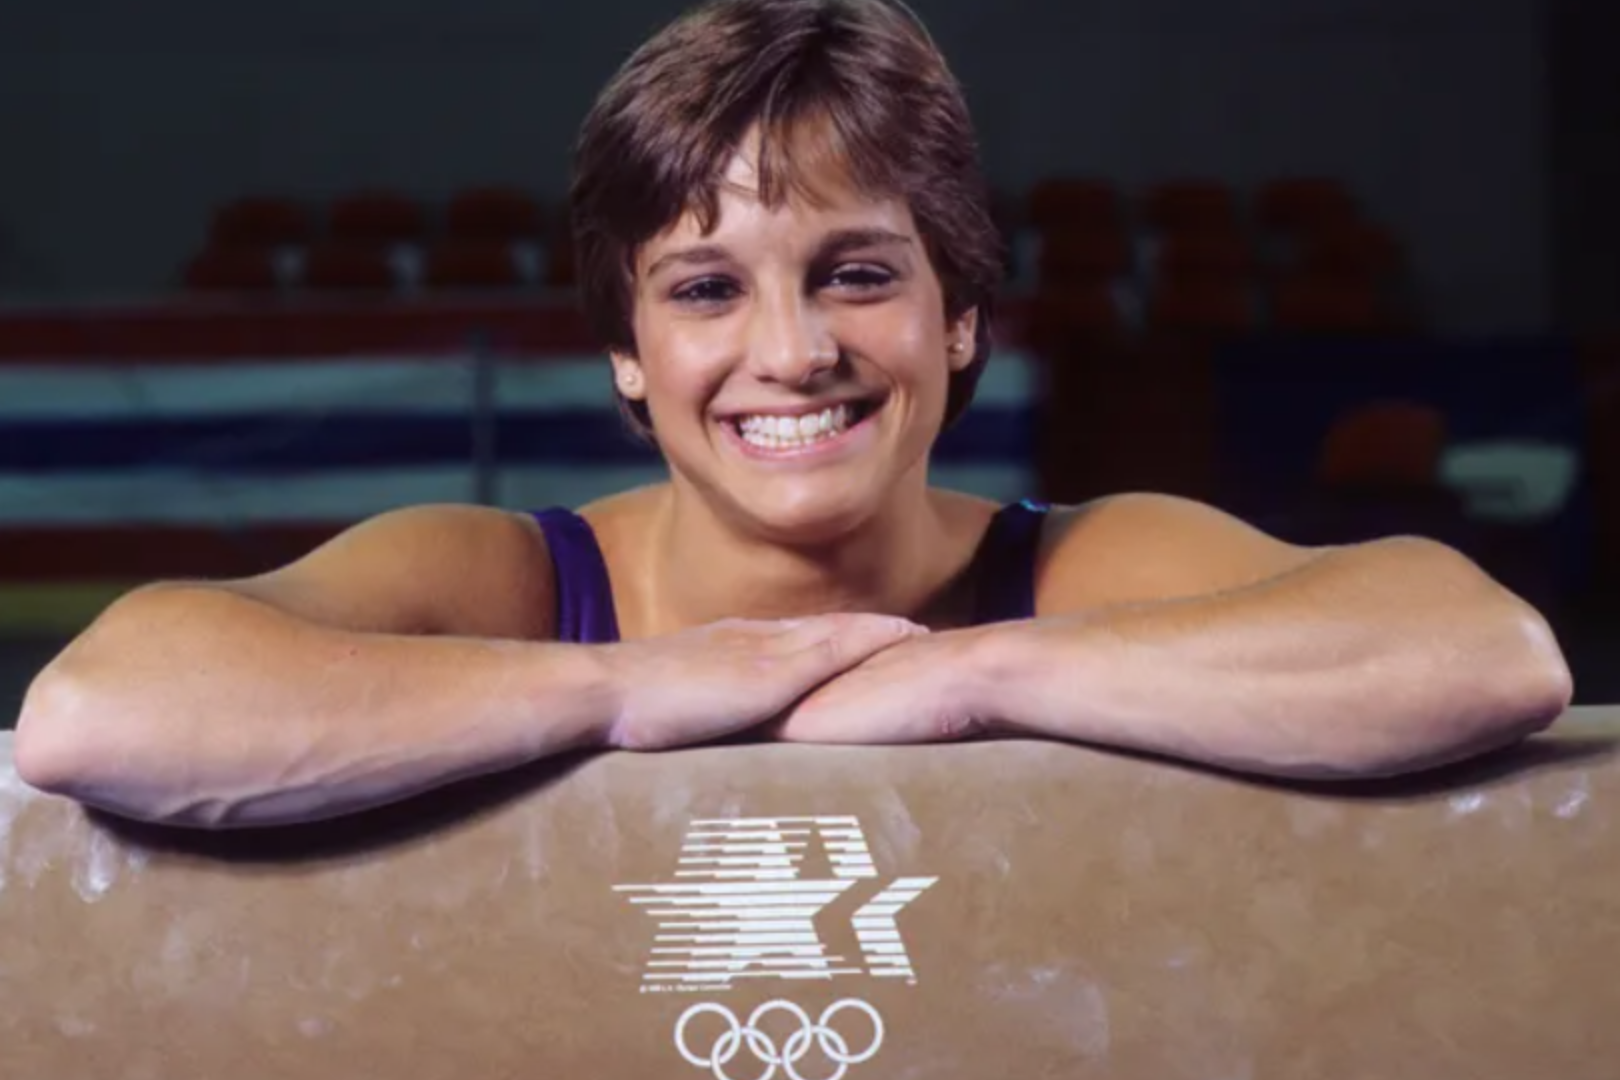 article_img / What happened with Mary Lou Retton?